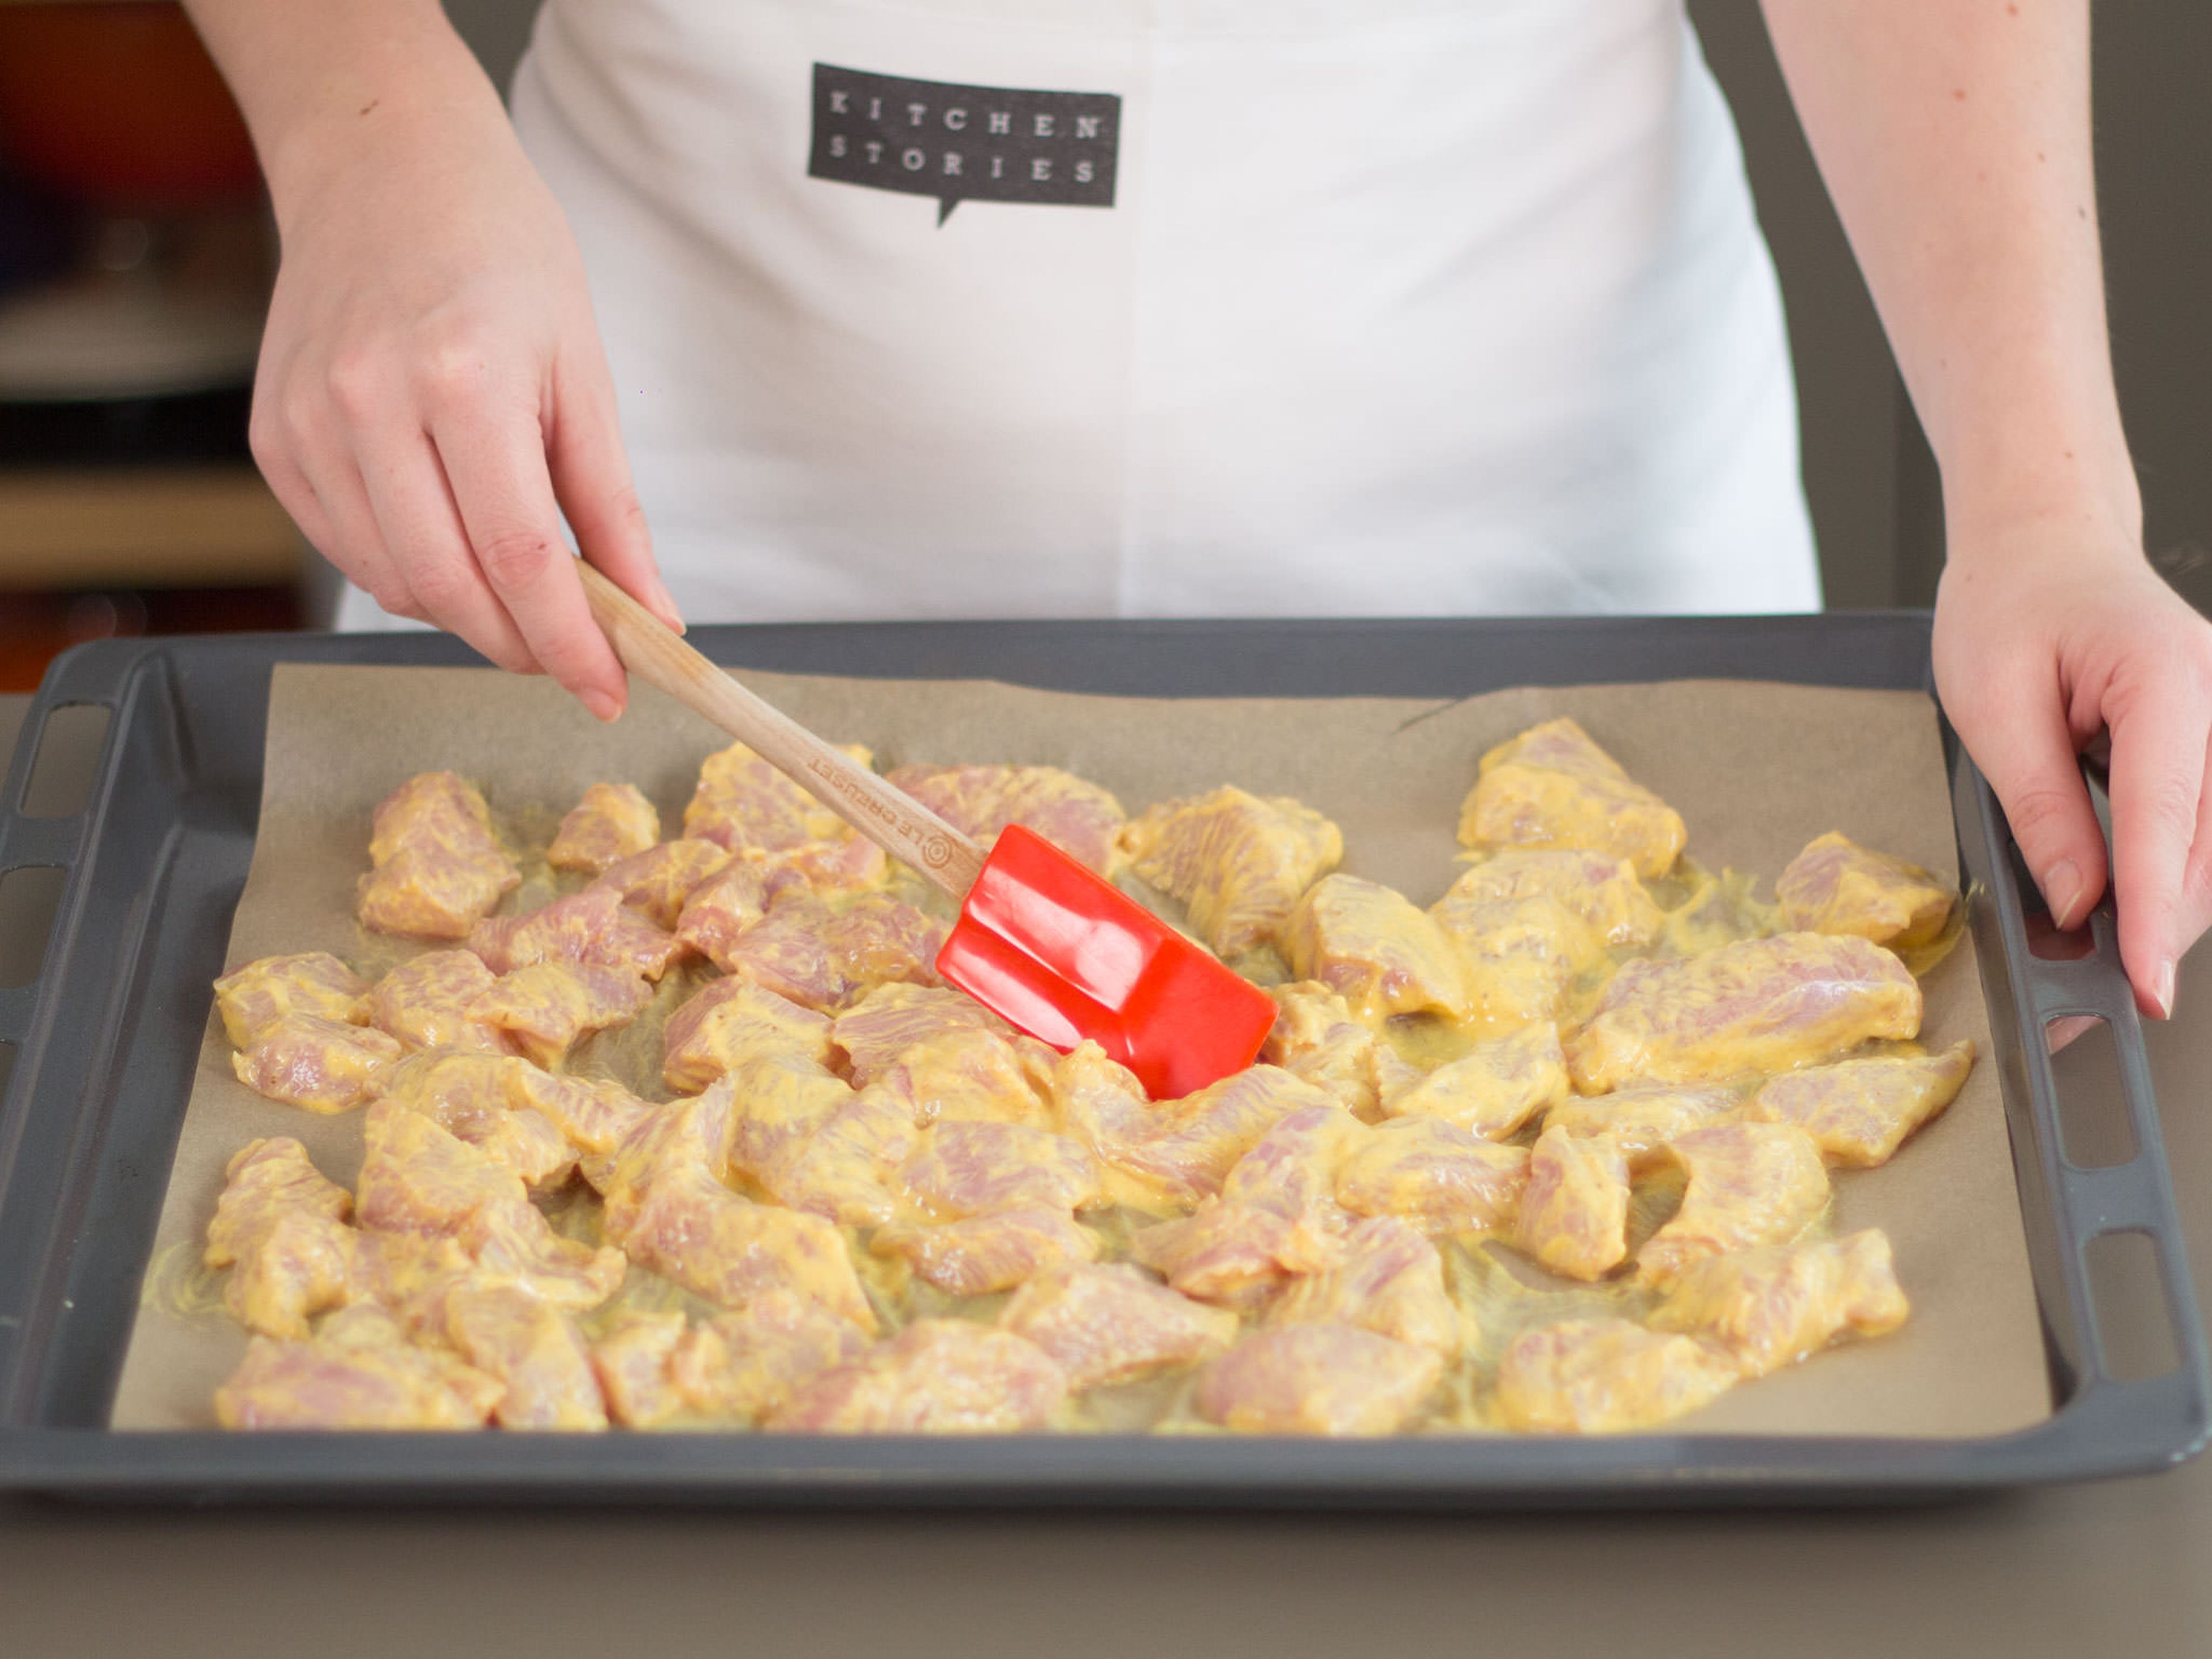 Preheat oven to 180°C/355°F. Transfer marinated chicken to a lined baking sheet and bake in oven for approx. 25 – 30 min.